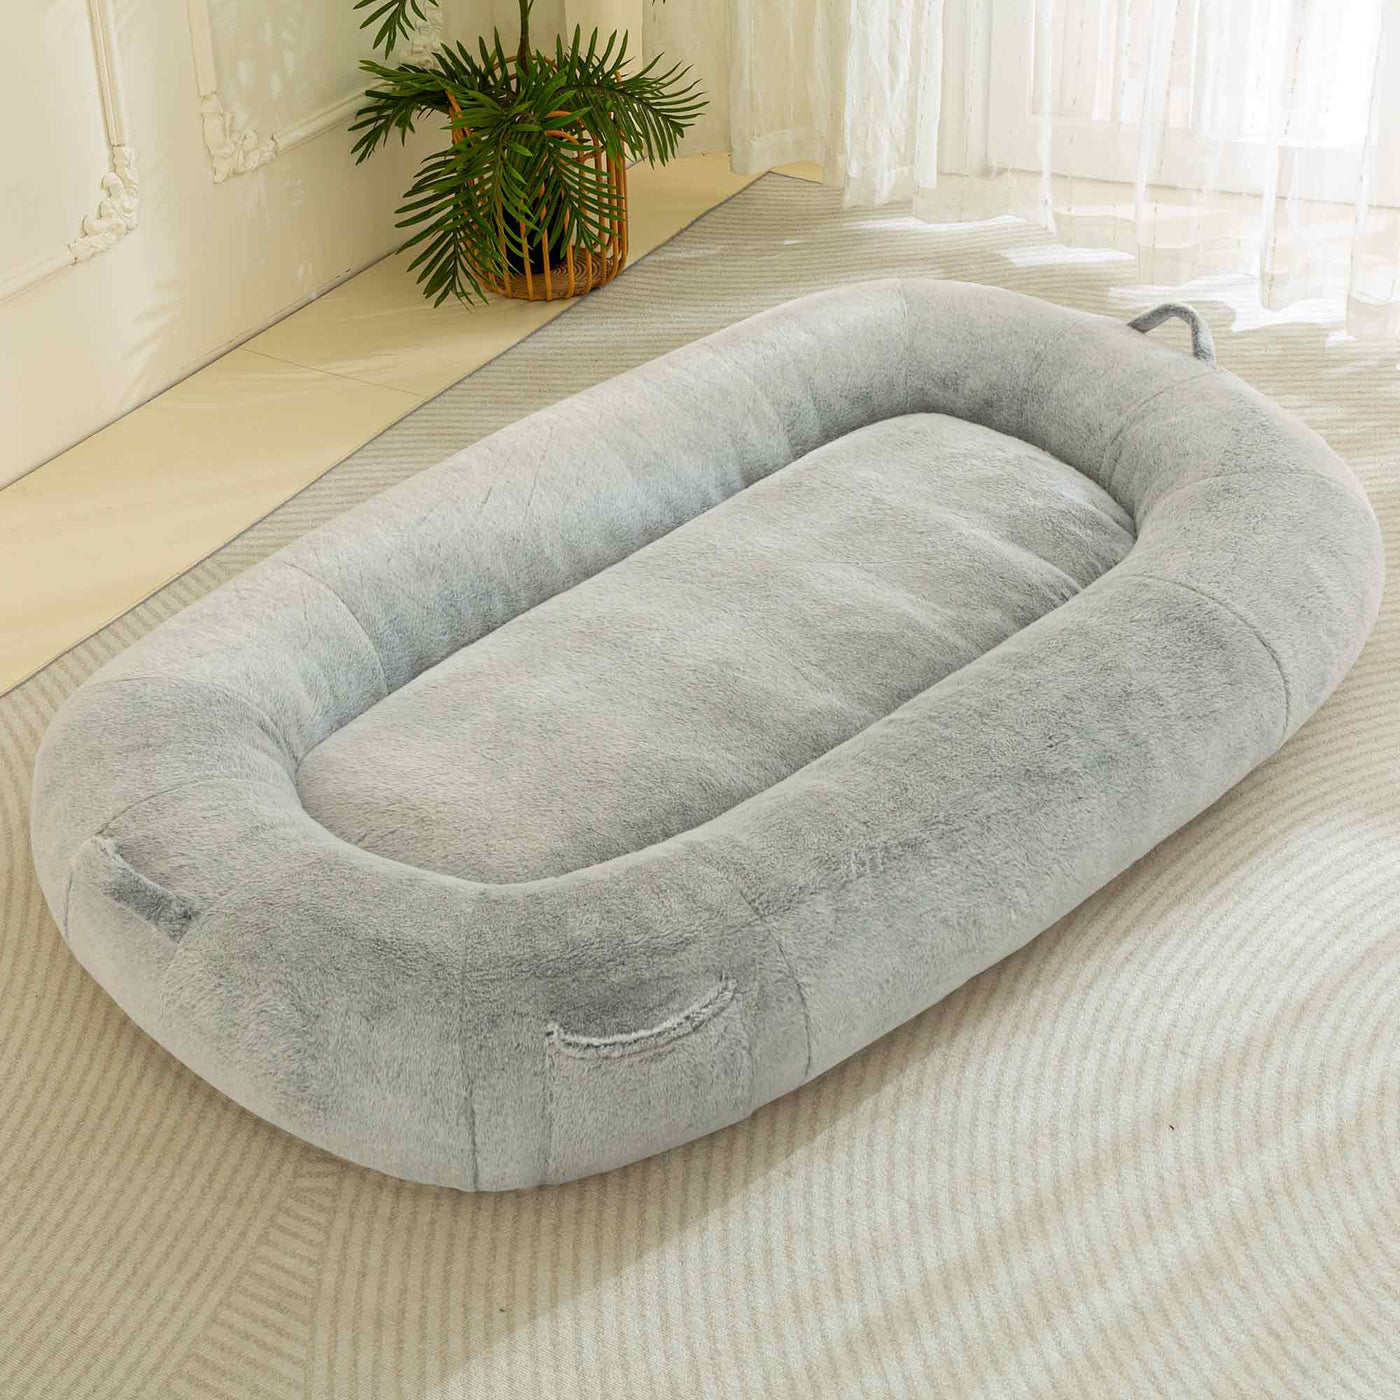 MAXYOYO Human Dog Bed, Giant Bean Bag Dog Bed for Humans and Pets, Light Grey